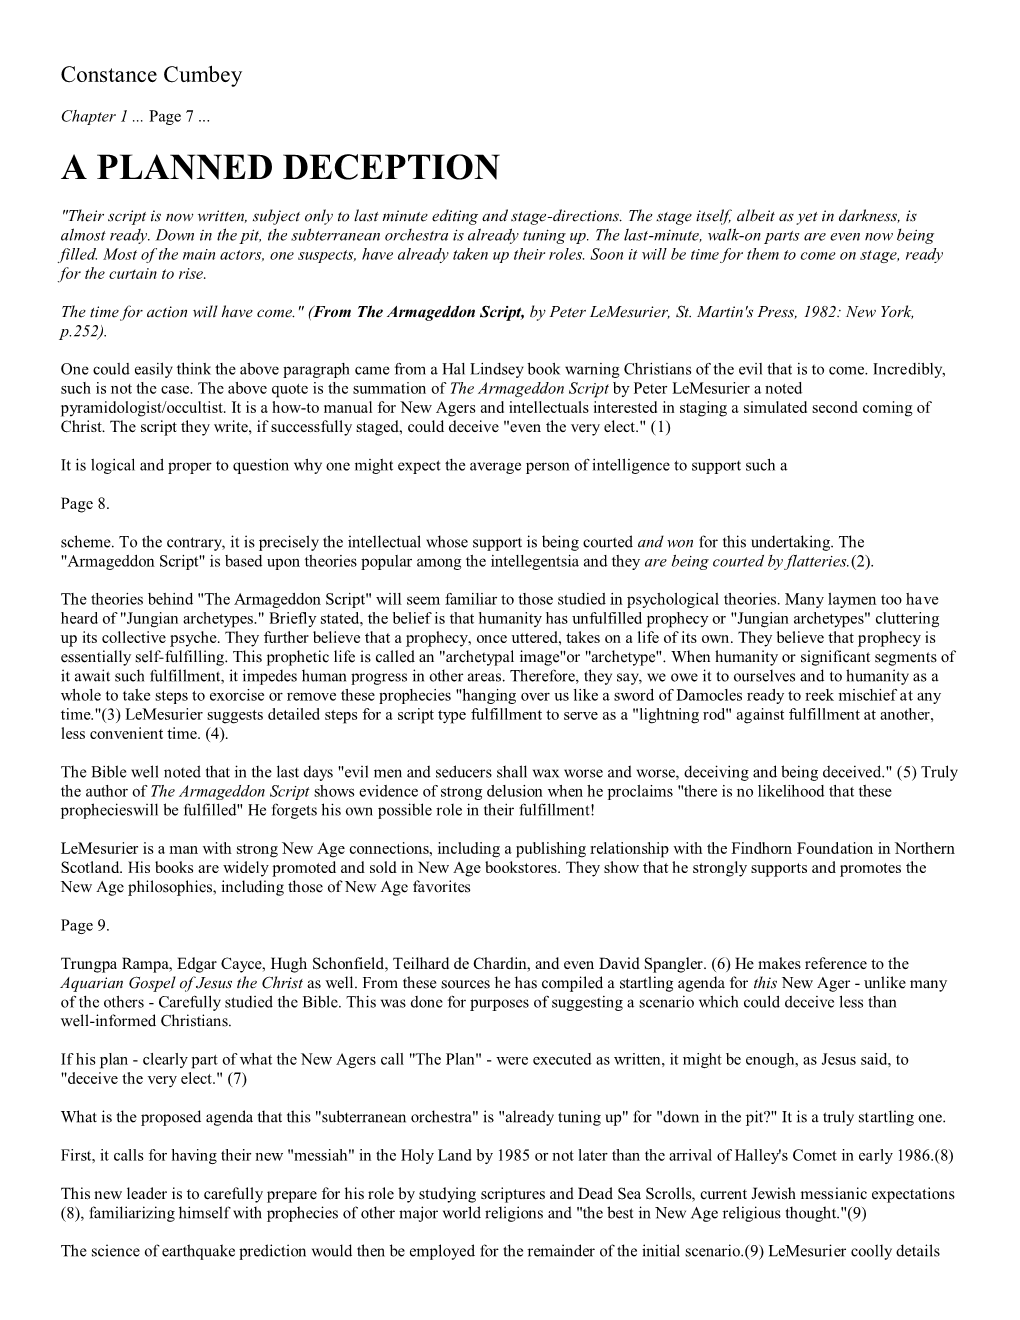 A Planned Deception